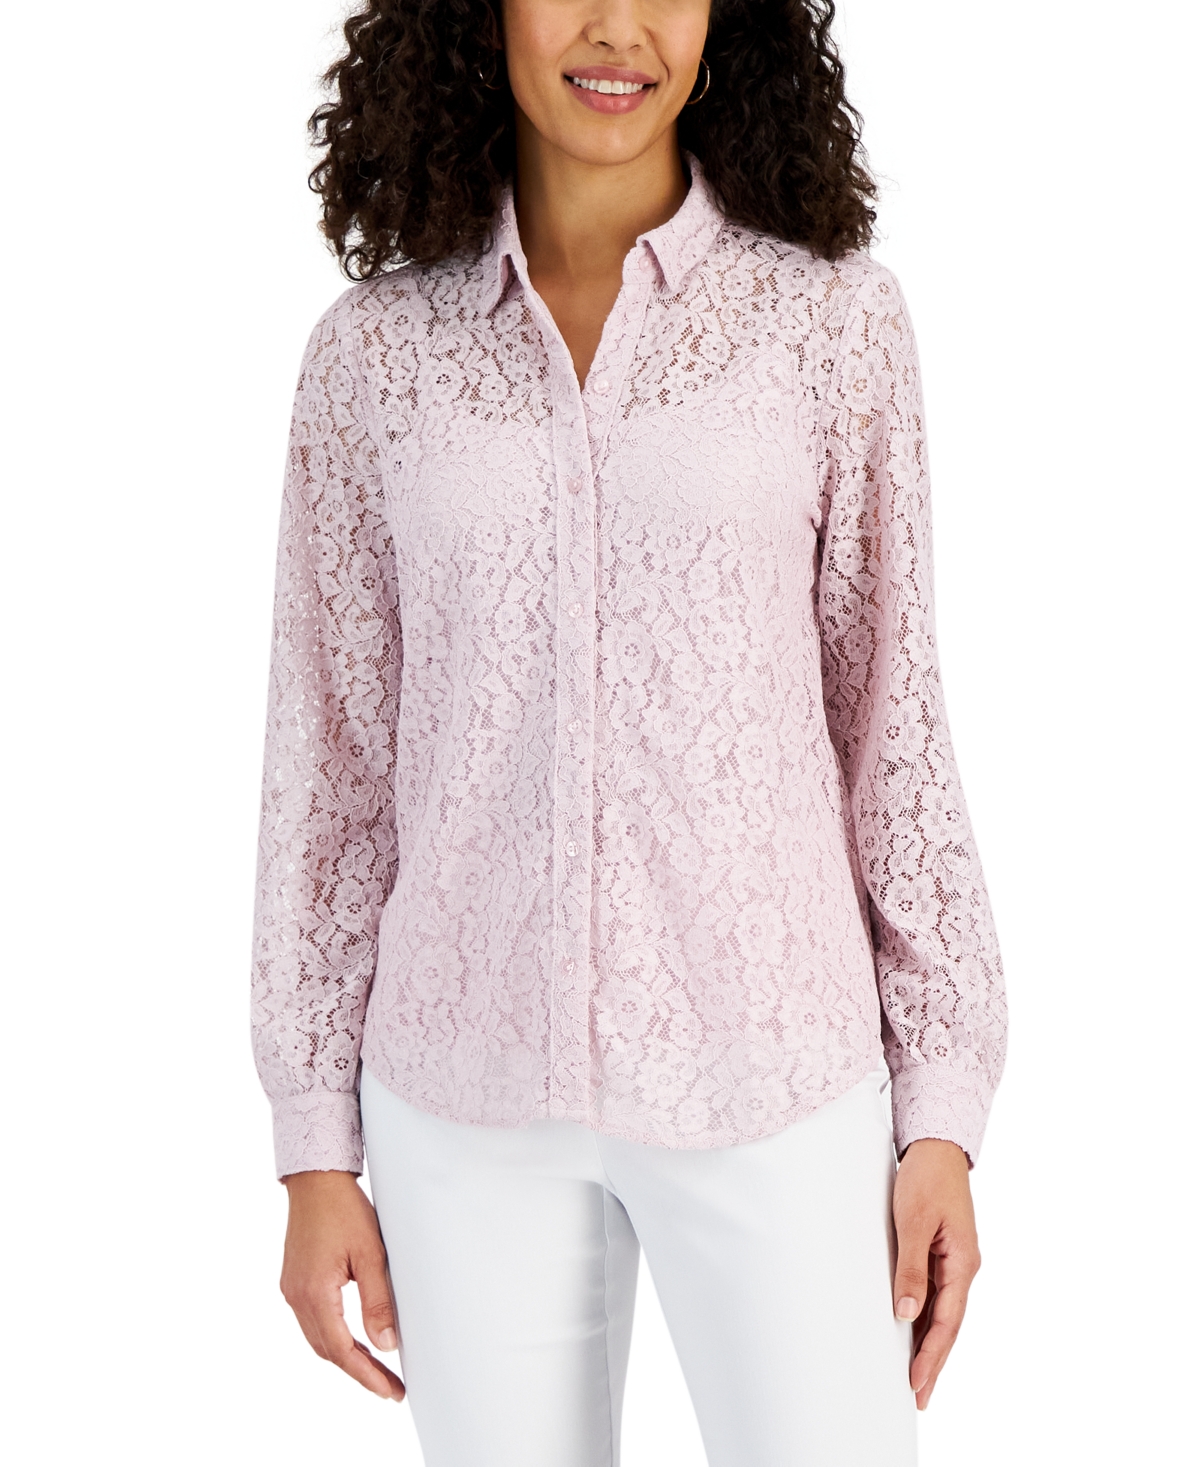 Women's Lace Button-Down Long-Sleeve Shirt, Created for Macy's - Lilac Sky